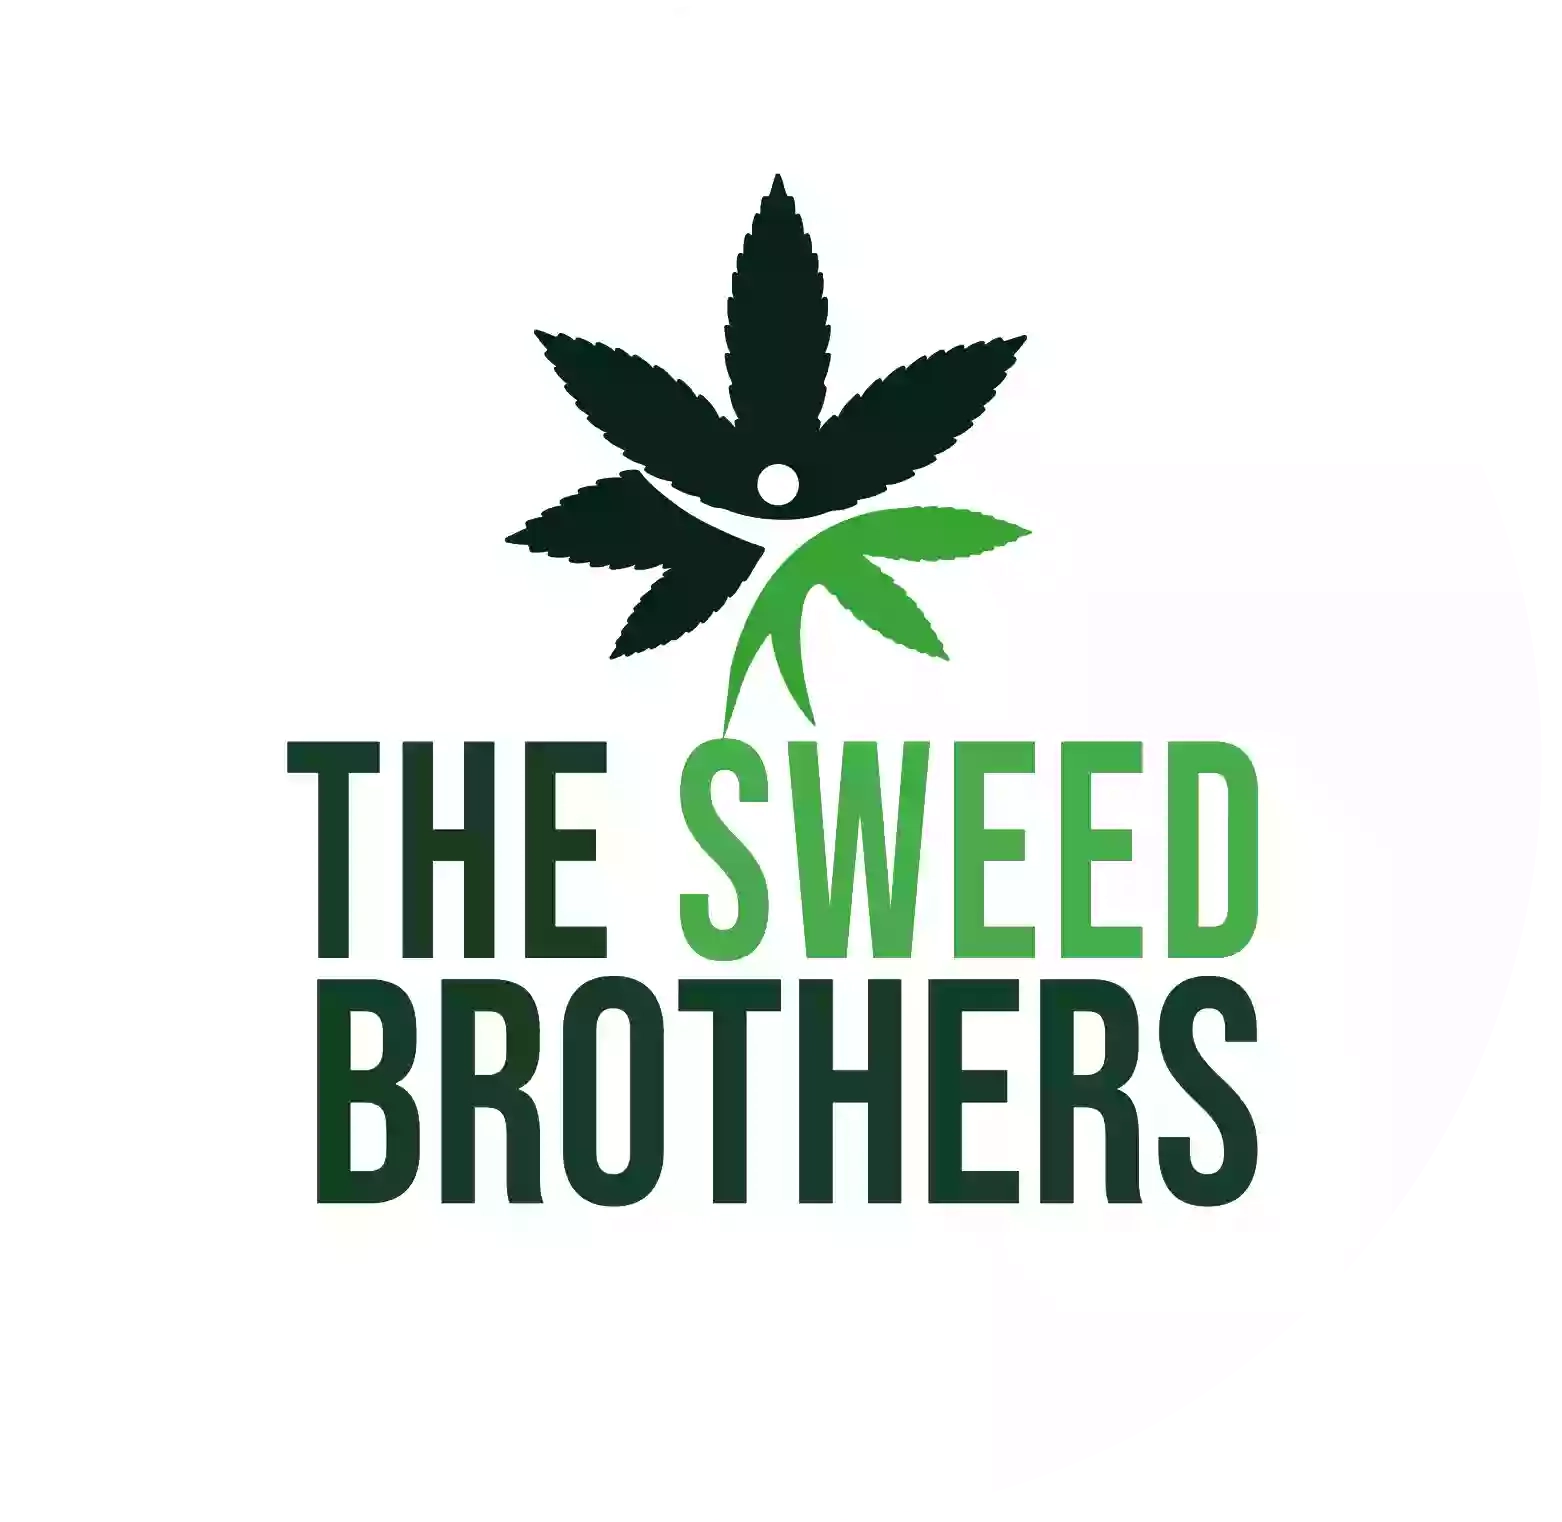 The Sweed Brothers Verona Cannabis Light Store Canapa Legale Self H24 Delivery Dispensary Store GrowShop & Seed